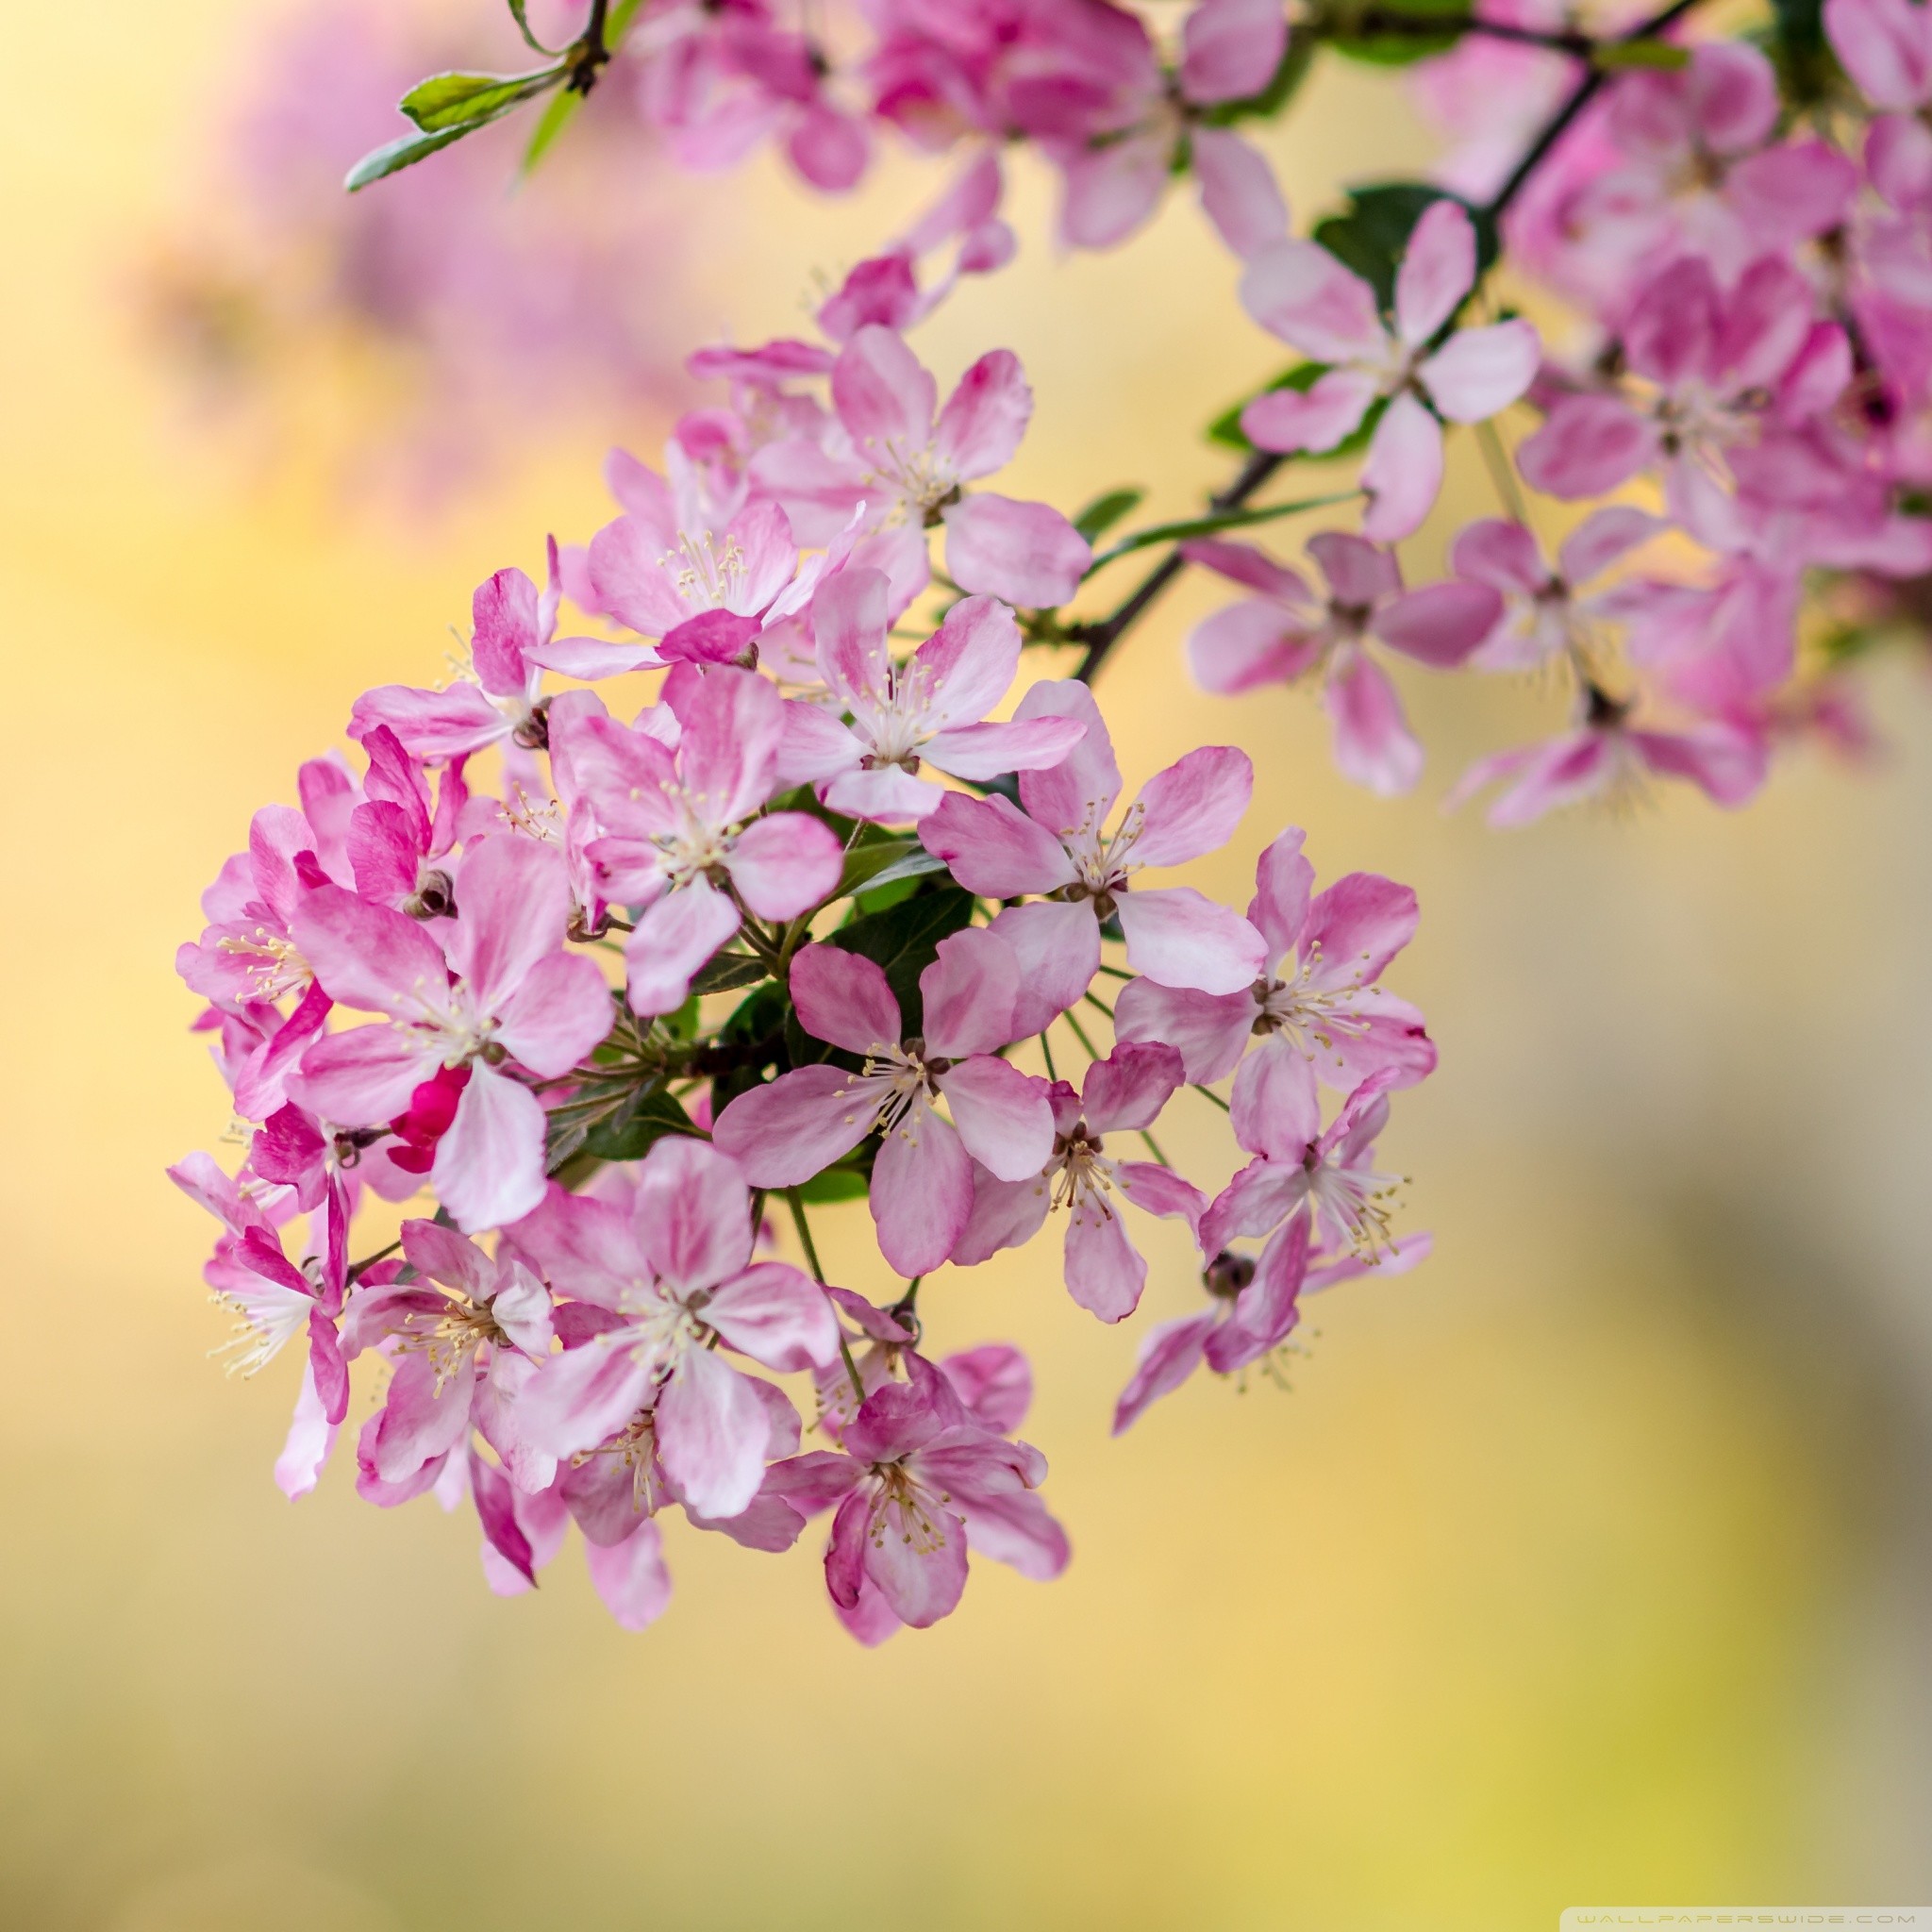 2048x2048 Pretty Spring Backgrounds and Wallpapers - WallpaperSafari ...